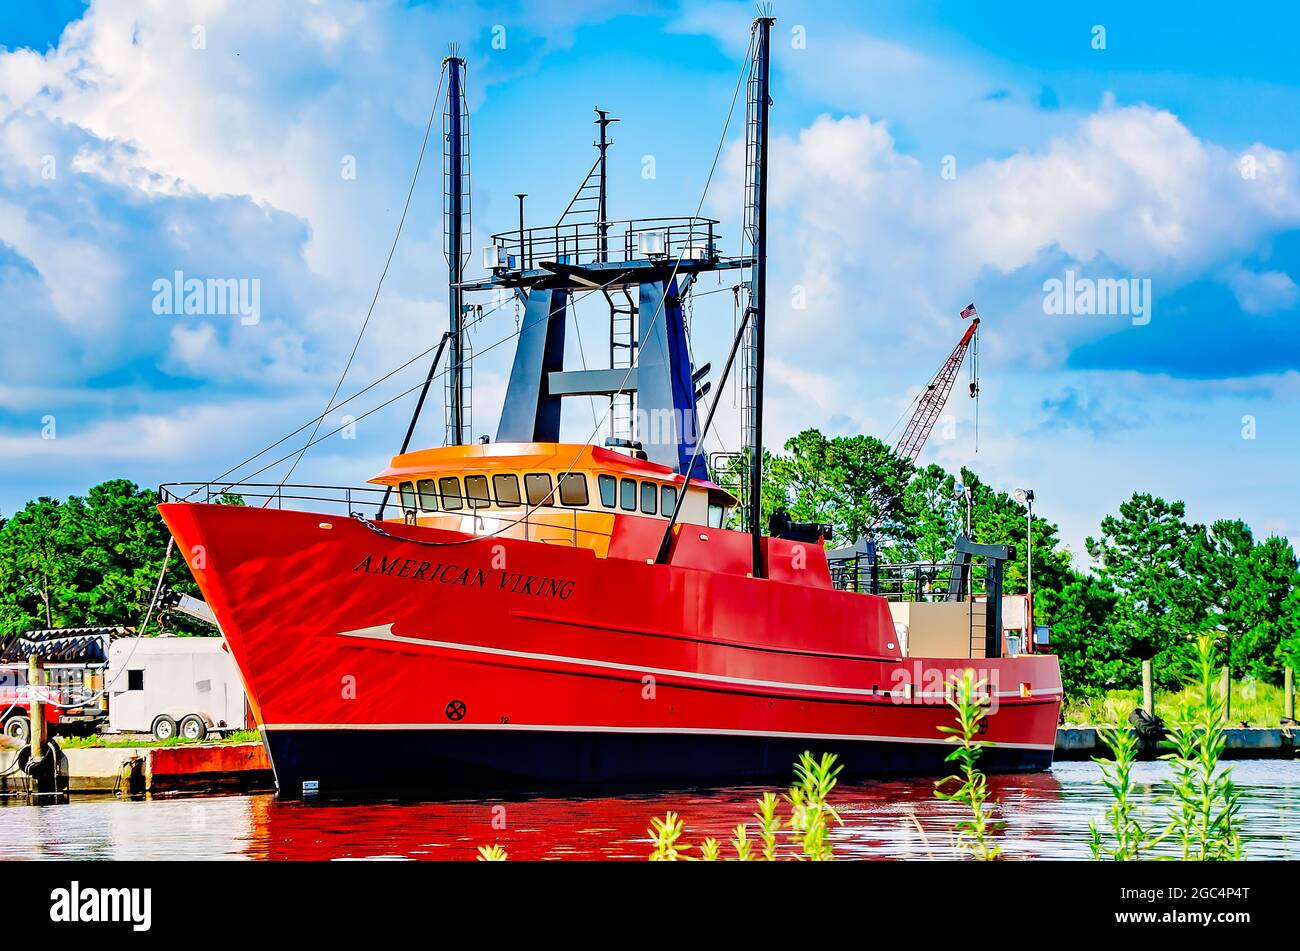 American Viking, a scallop boat, is docked during construction at Williams Fabrication, July 13, 2021, in Bayou La Batre, Alabama. Stock Photo